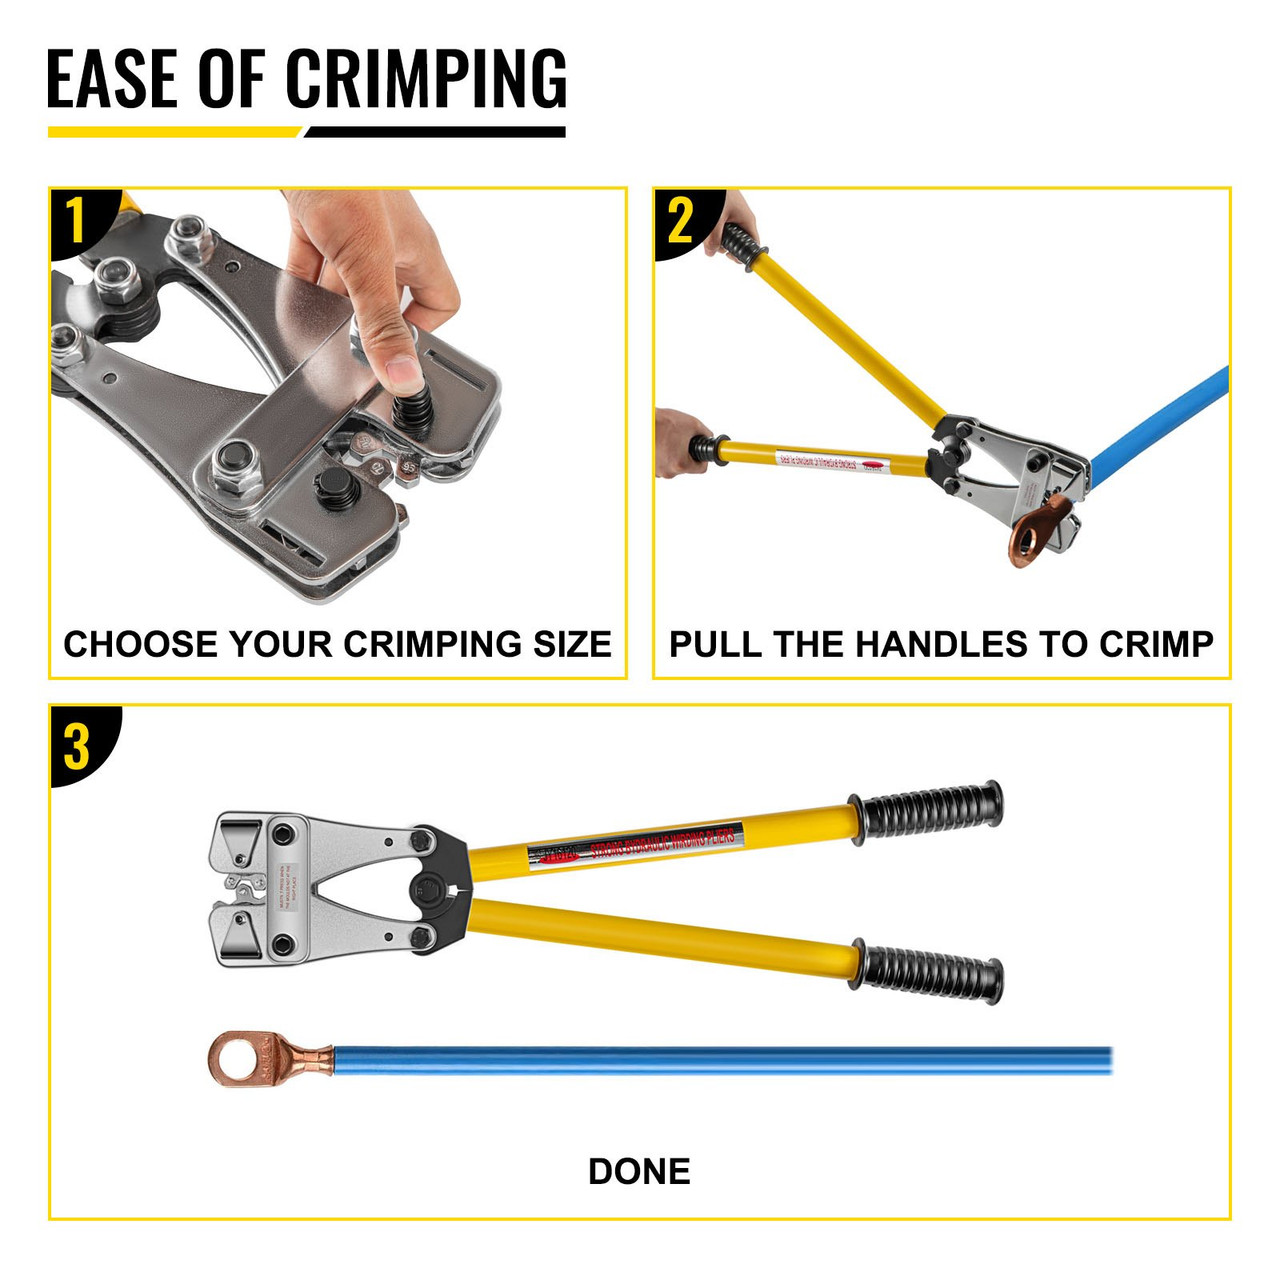 Battery Cable Crimping Tool 10-120 mm2, Cable Lug Crimping Tool for Heavy Duty Wire Lugs, Battery Cable Crimper for AWG 8-4/0, Hexagon Lug Crimping Tool for Wire Cable Cutting and Crimping